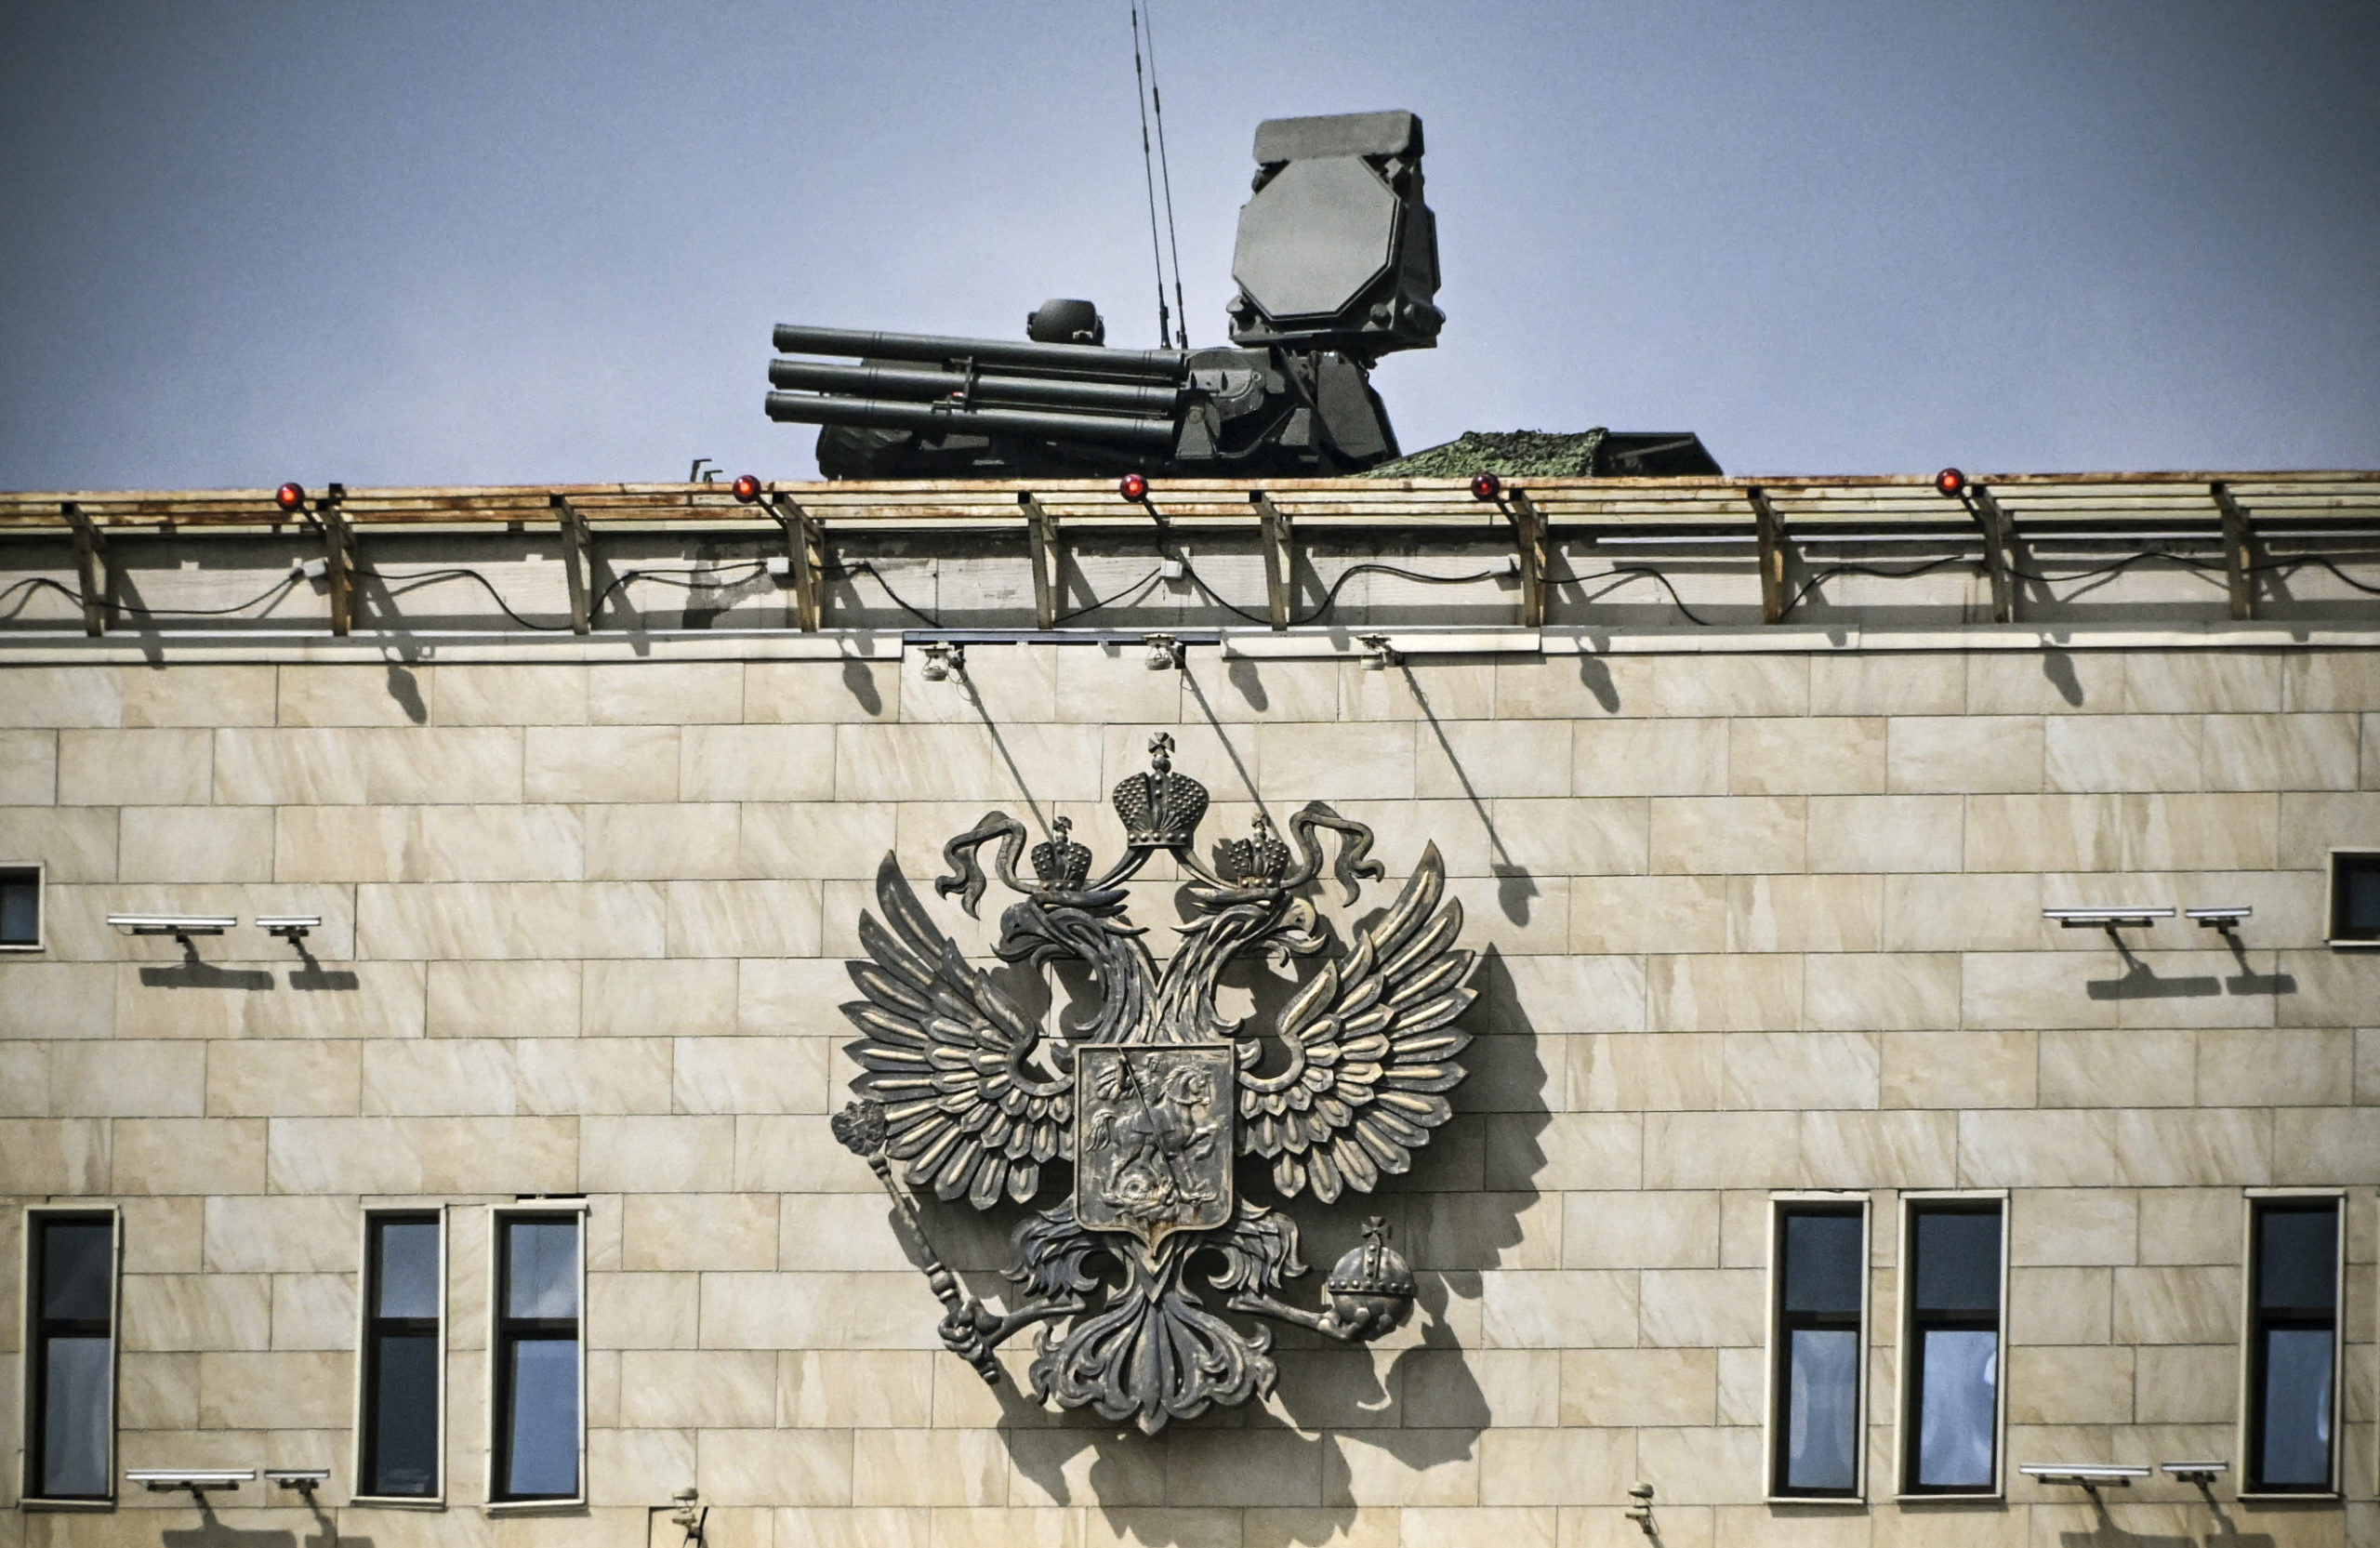 An SA-22 sits atop the the Russian Defense Ministry headquarters in Moscow. (Photo by ALEXANDER NEMENOV/AFP via Getty Images)